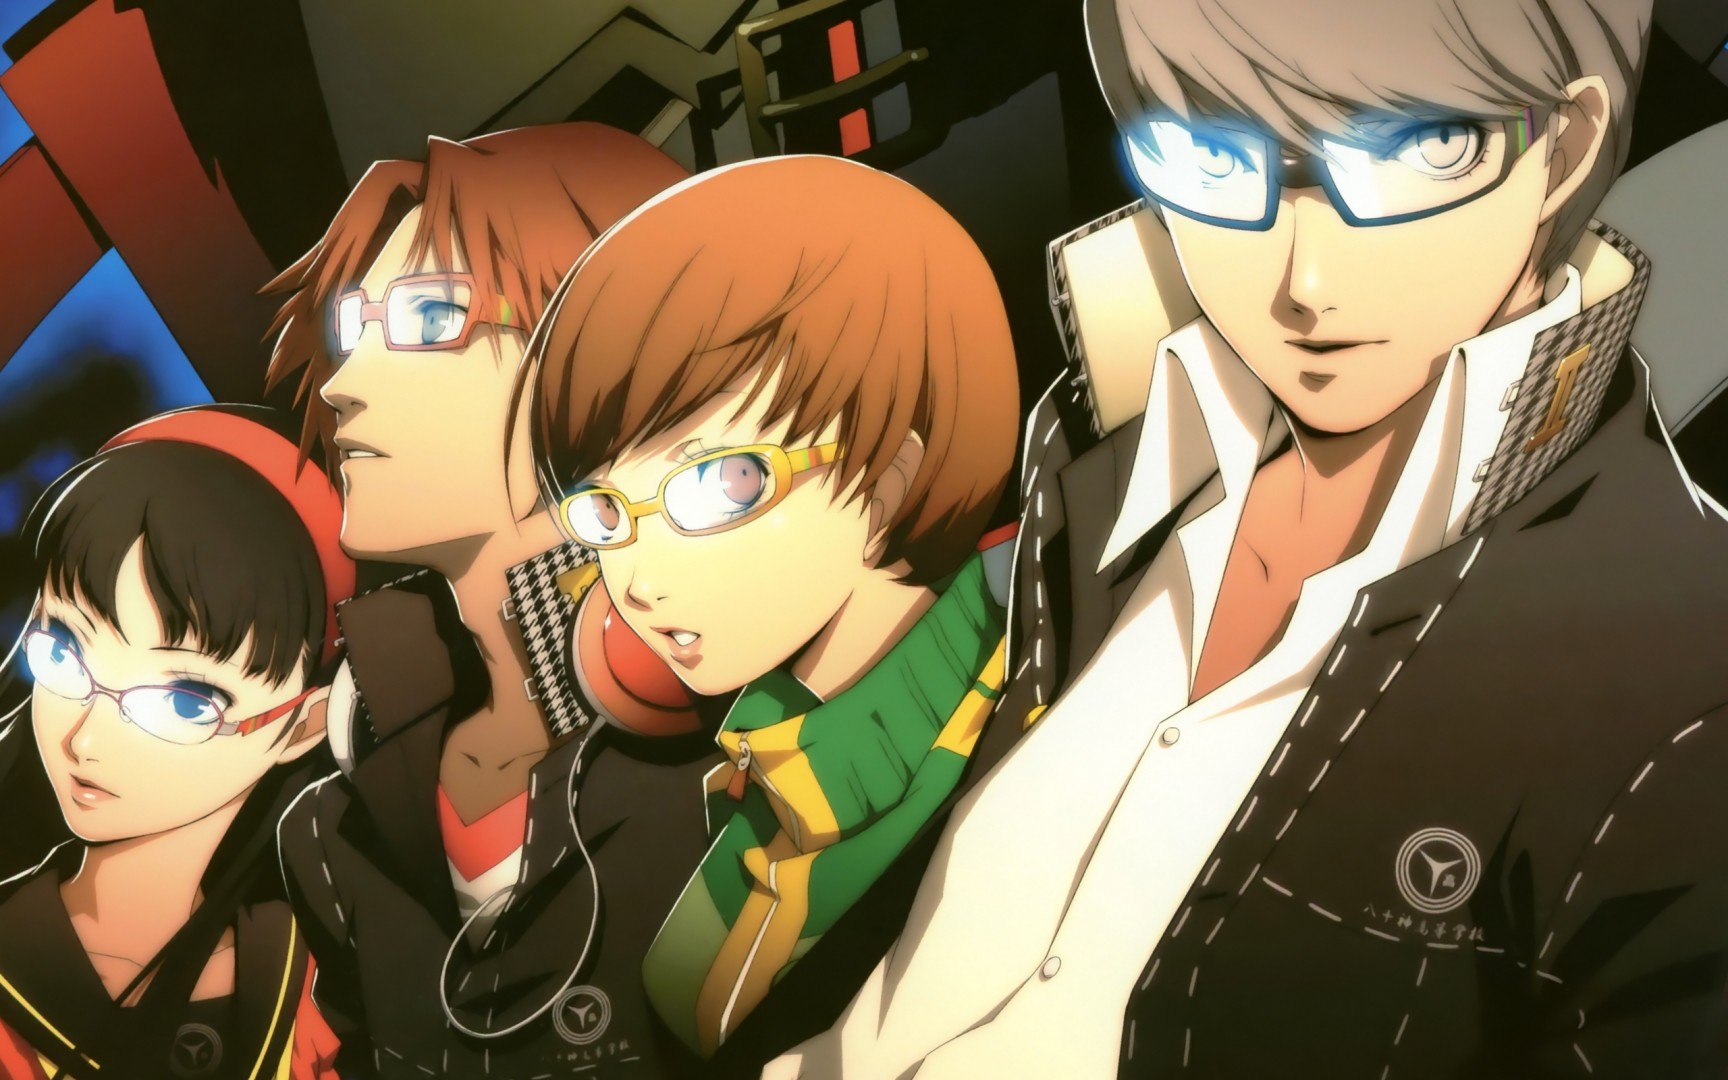 Persona 4 is Coming to the Playstation Network